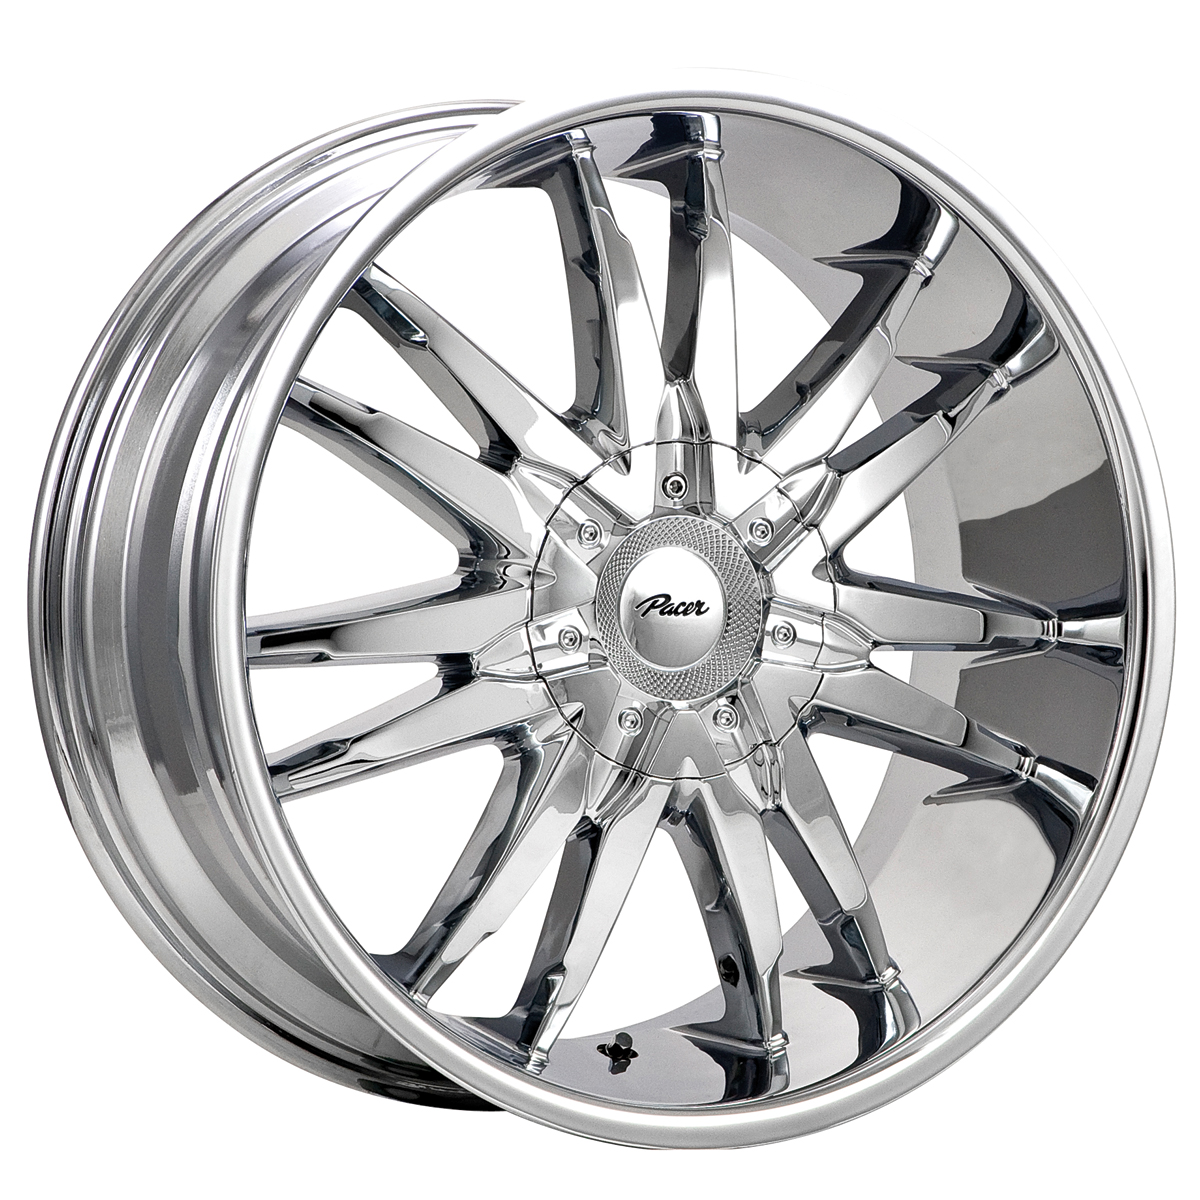 780C Rave FWD 16X7.5 (5-100) Chrome Plated Finish